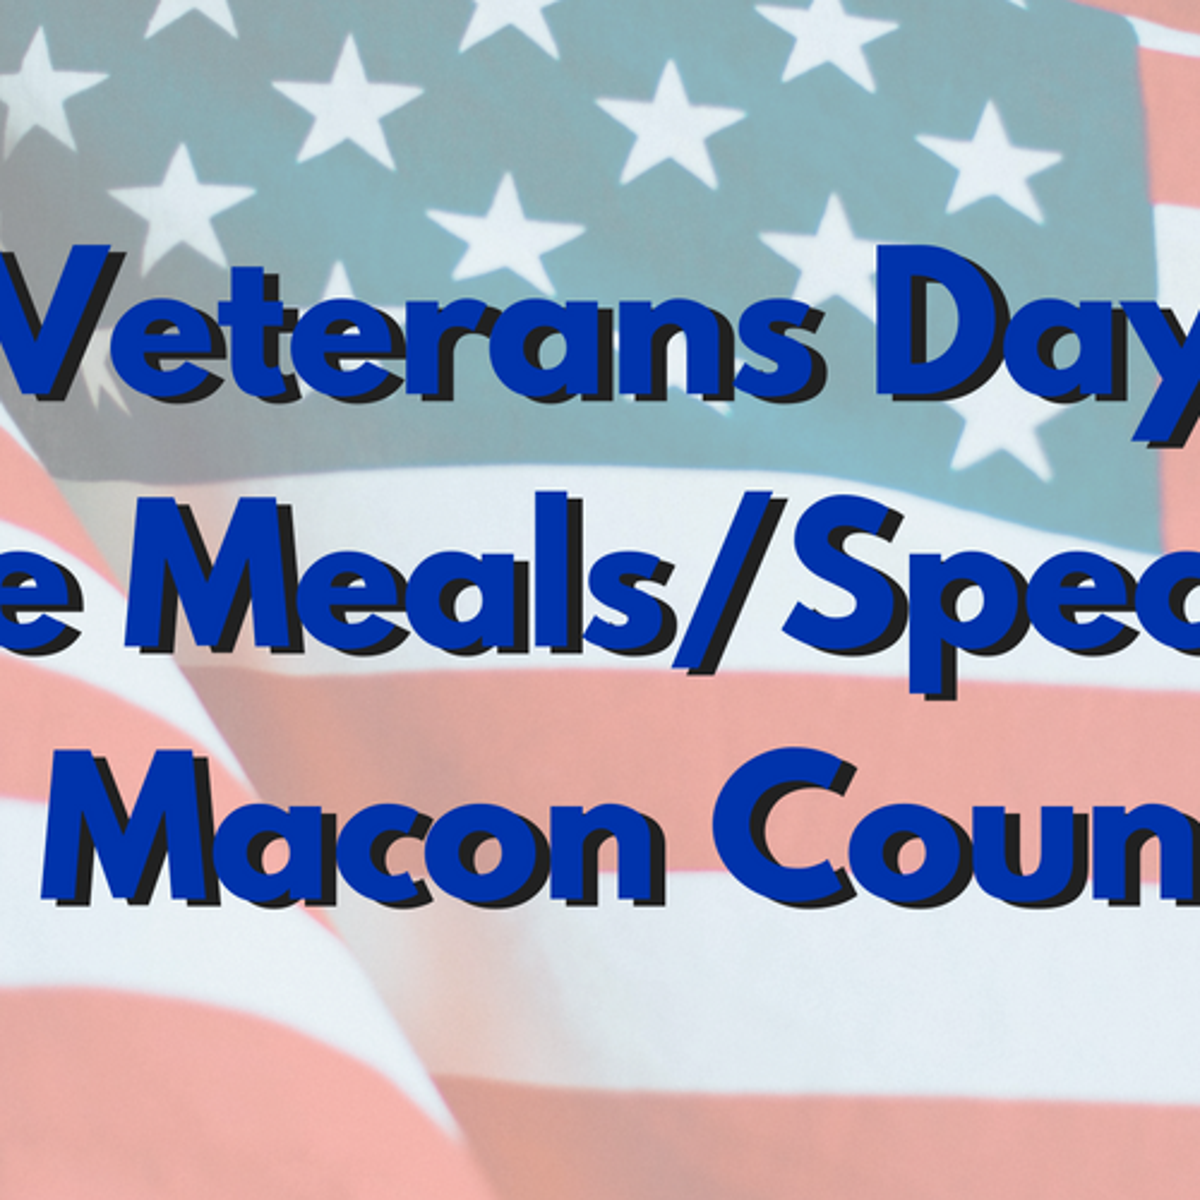 Veterans Day Free Meals Specials In Macon County Local Herald Review Com